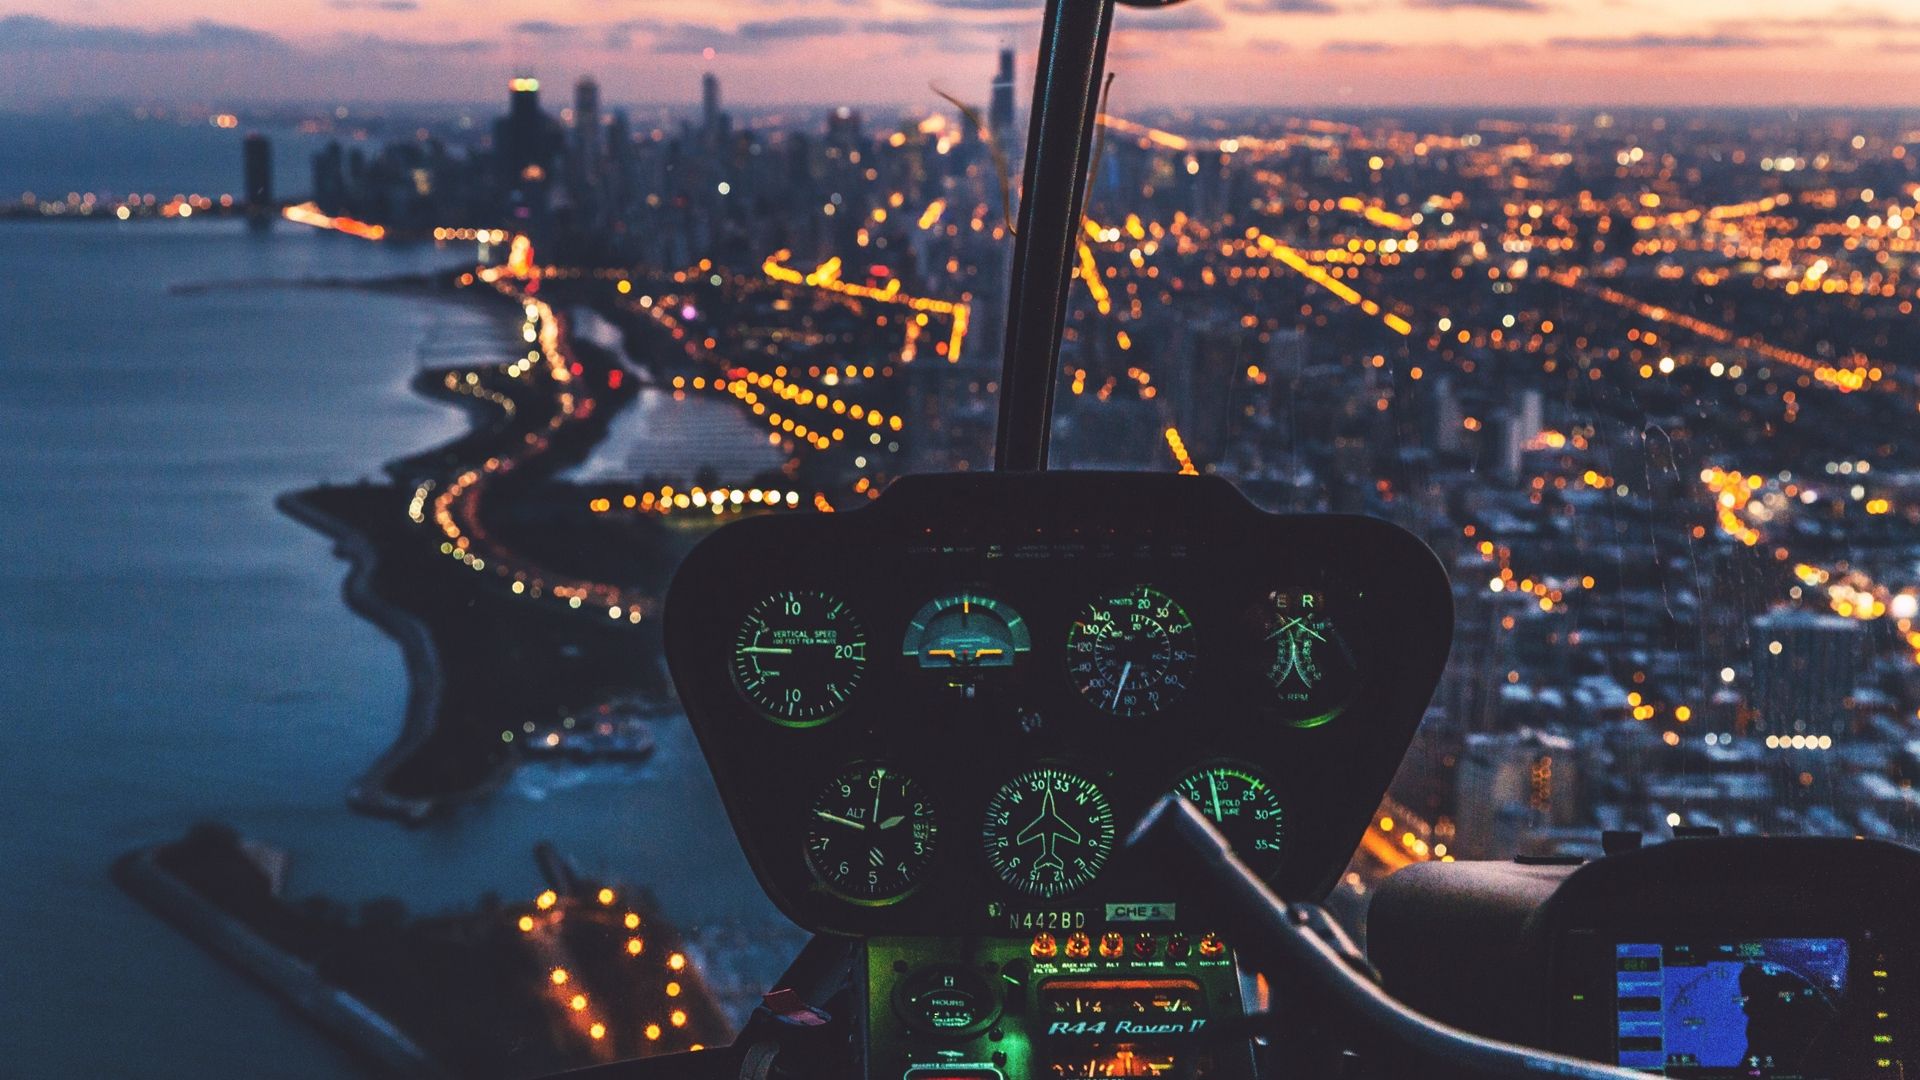 Download wallpaper 1920x1080 control panel, helicopter, pilot